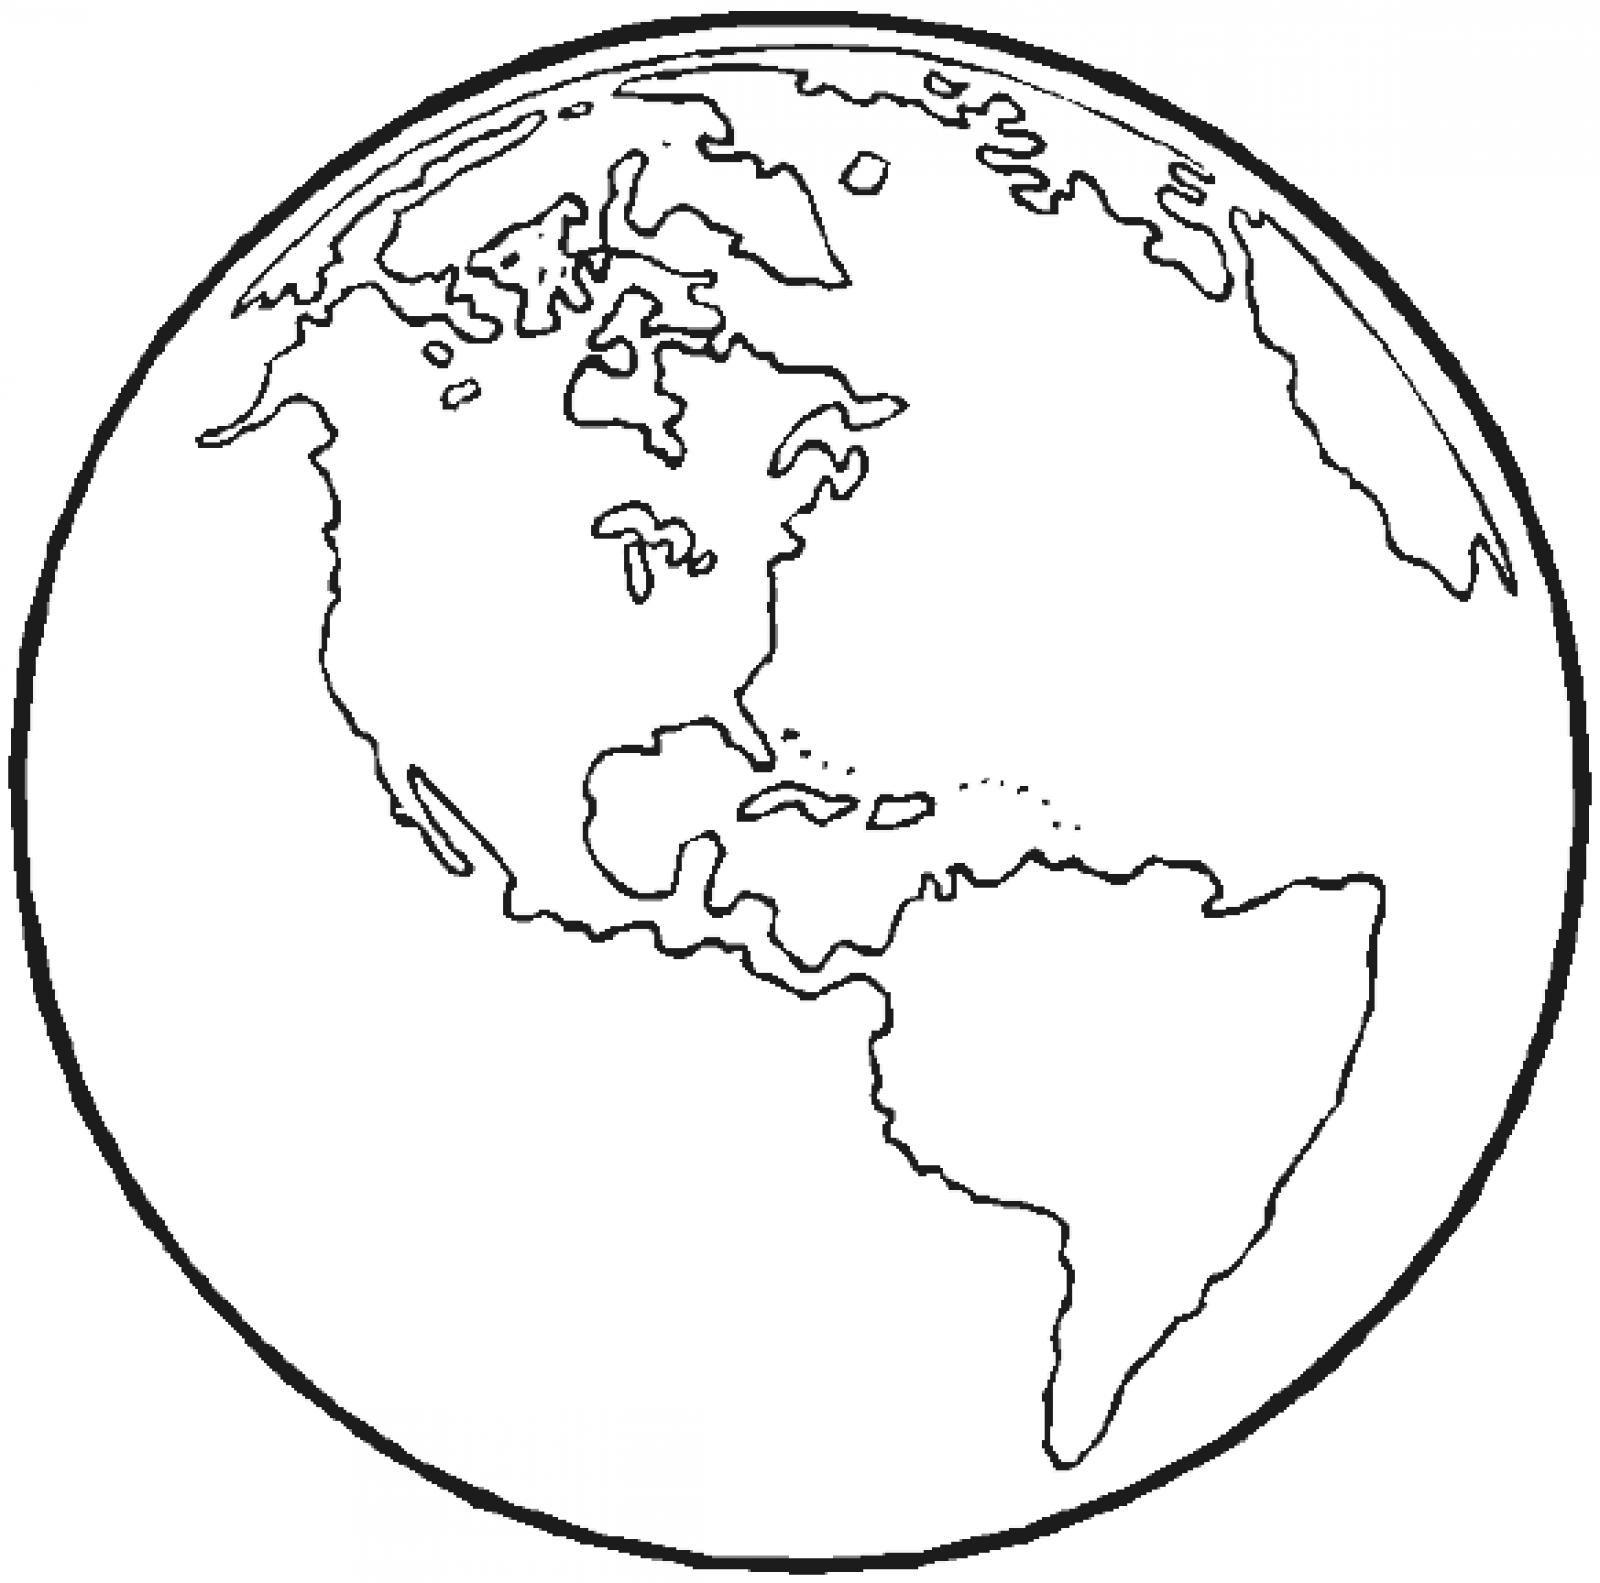 The Earth Coloring Page | Space coloring pages, Earth coloring ... - SheetalColor.com